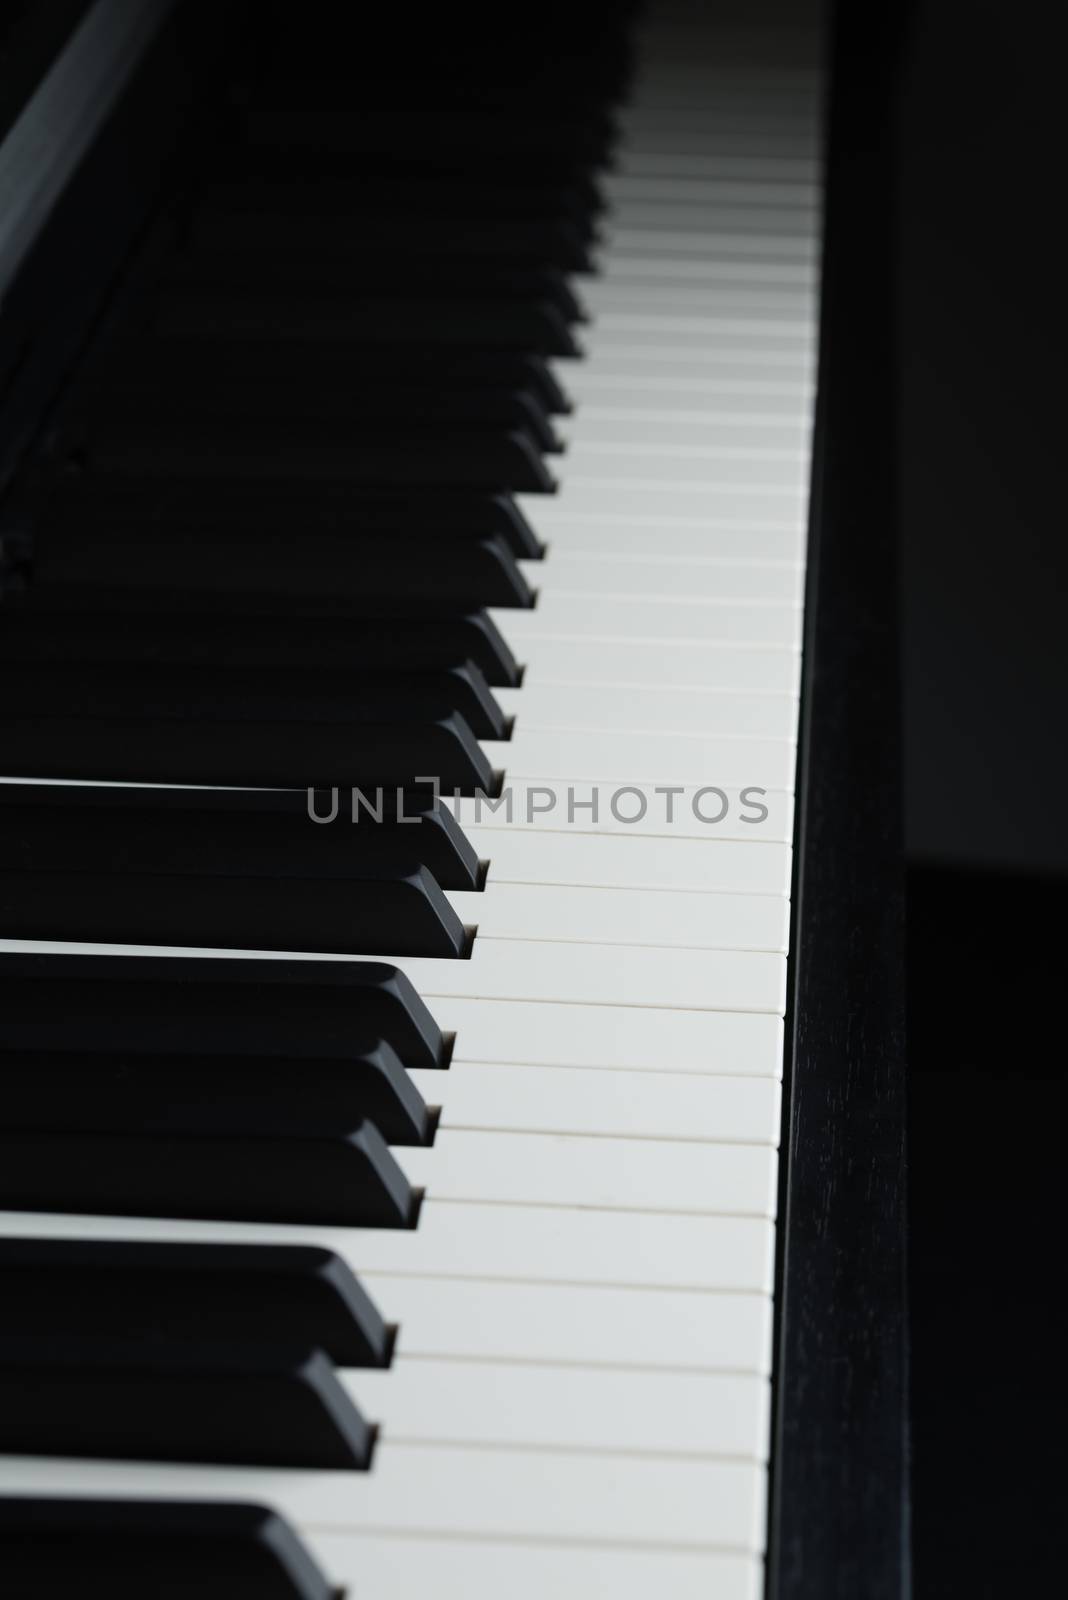 A dramatically dark picture of a piano's keyboard.